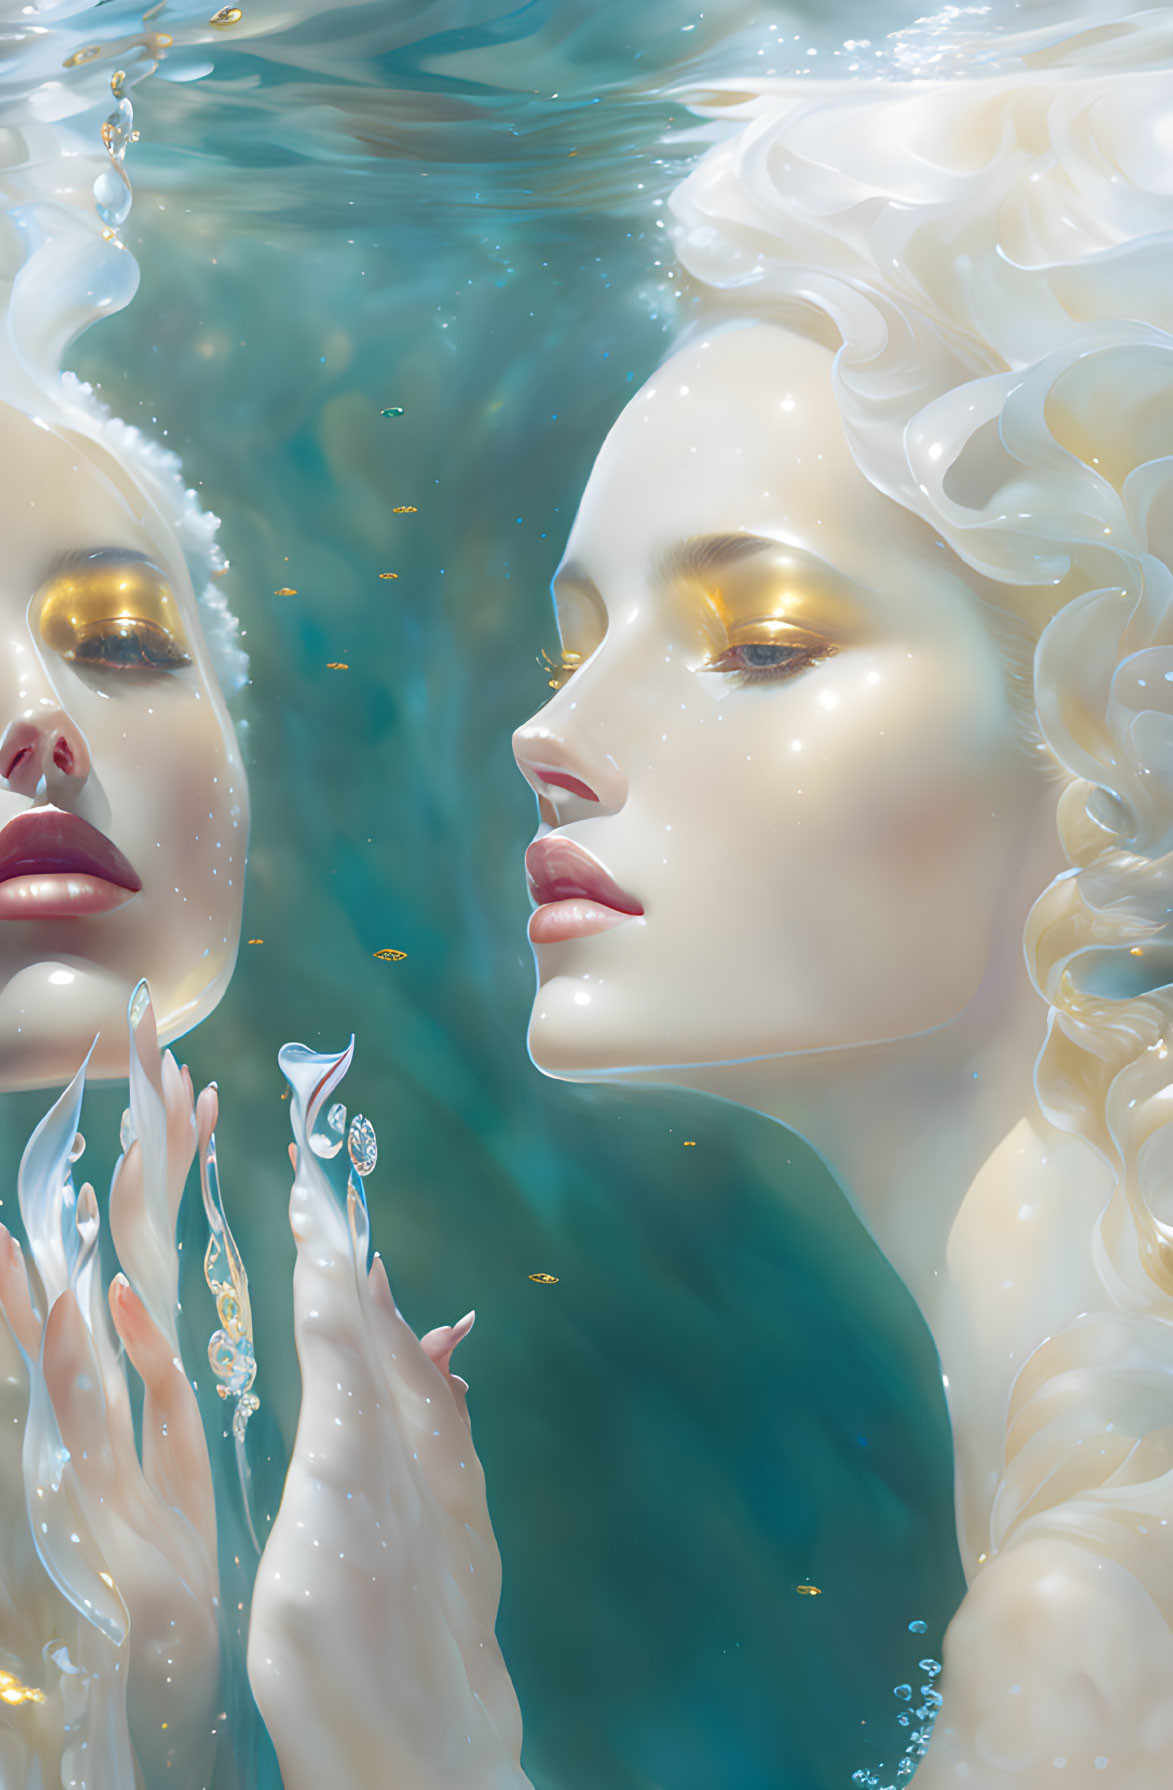 Ethereal women with golden eyes and white hair touching in water surrounded by bubbles